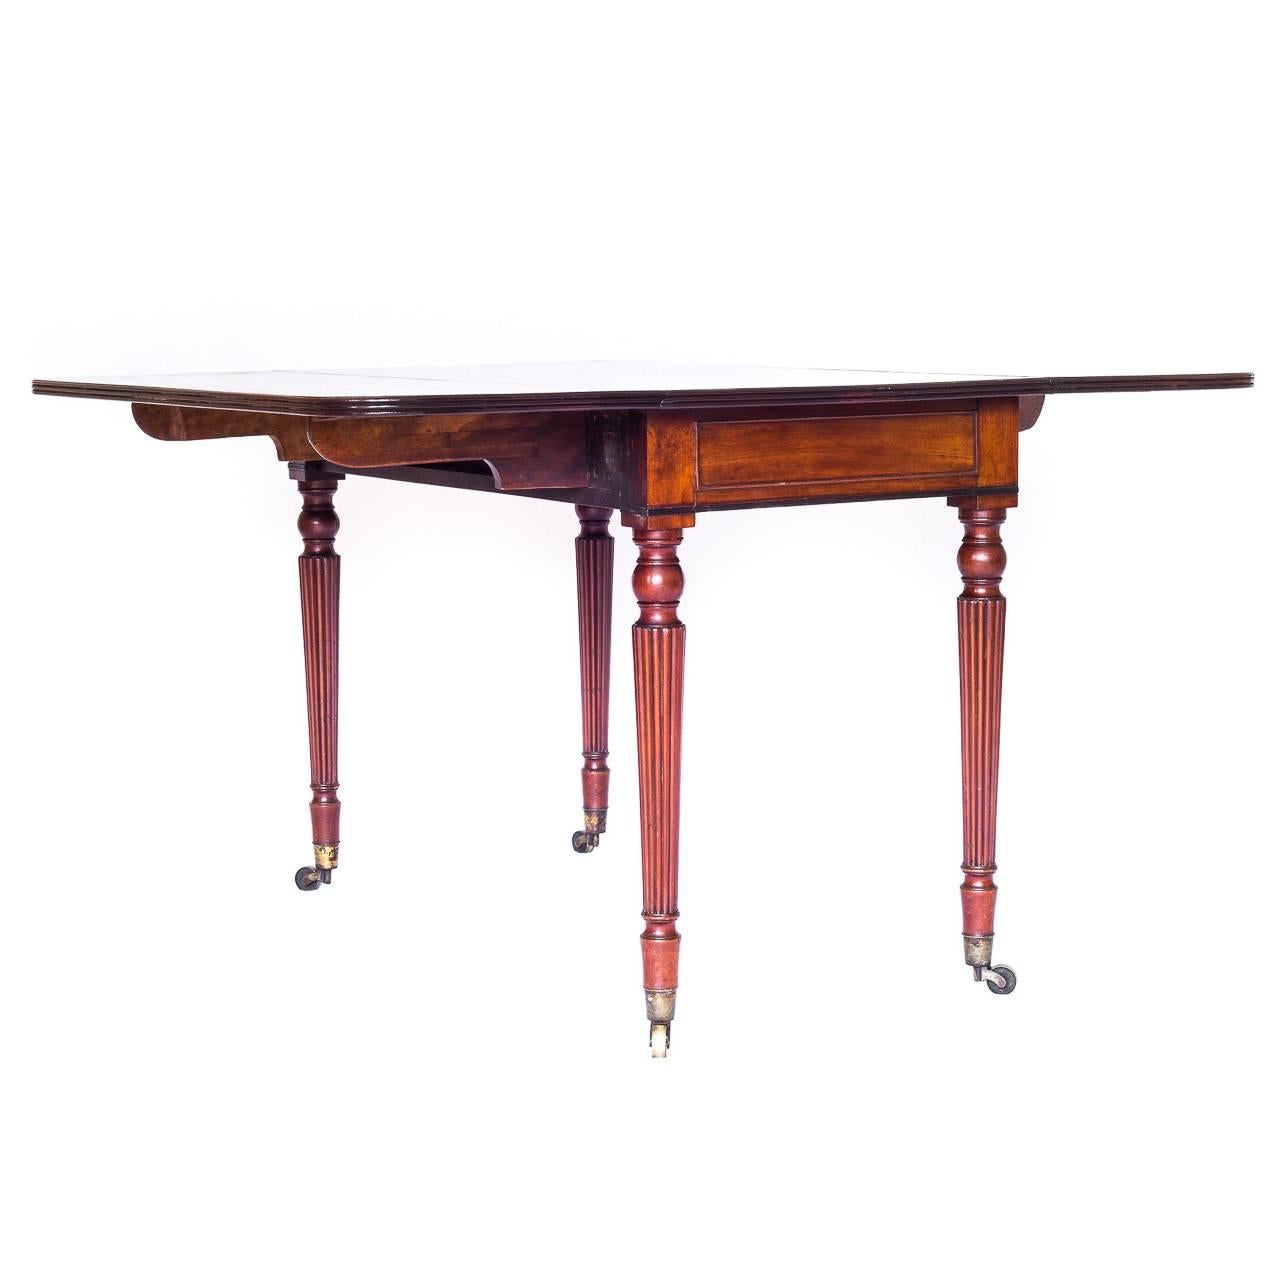 Early 19th Century Regency Mahogany and Rosewood Pembroke / Drop-Leaf Table of Gillows Style